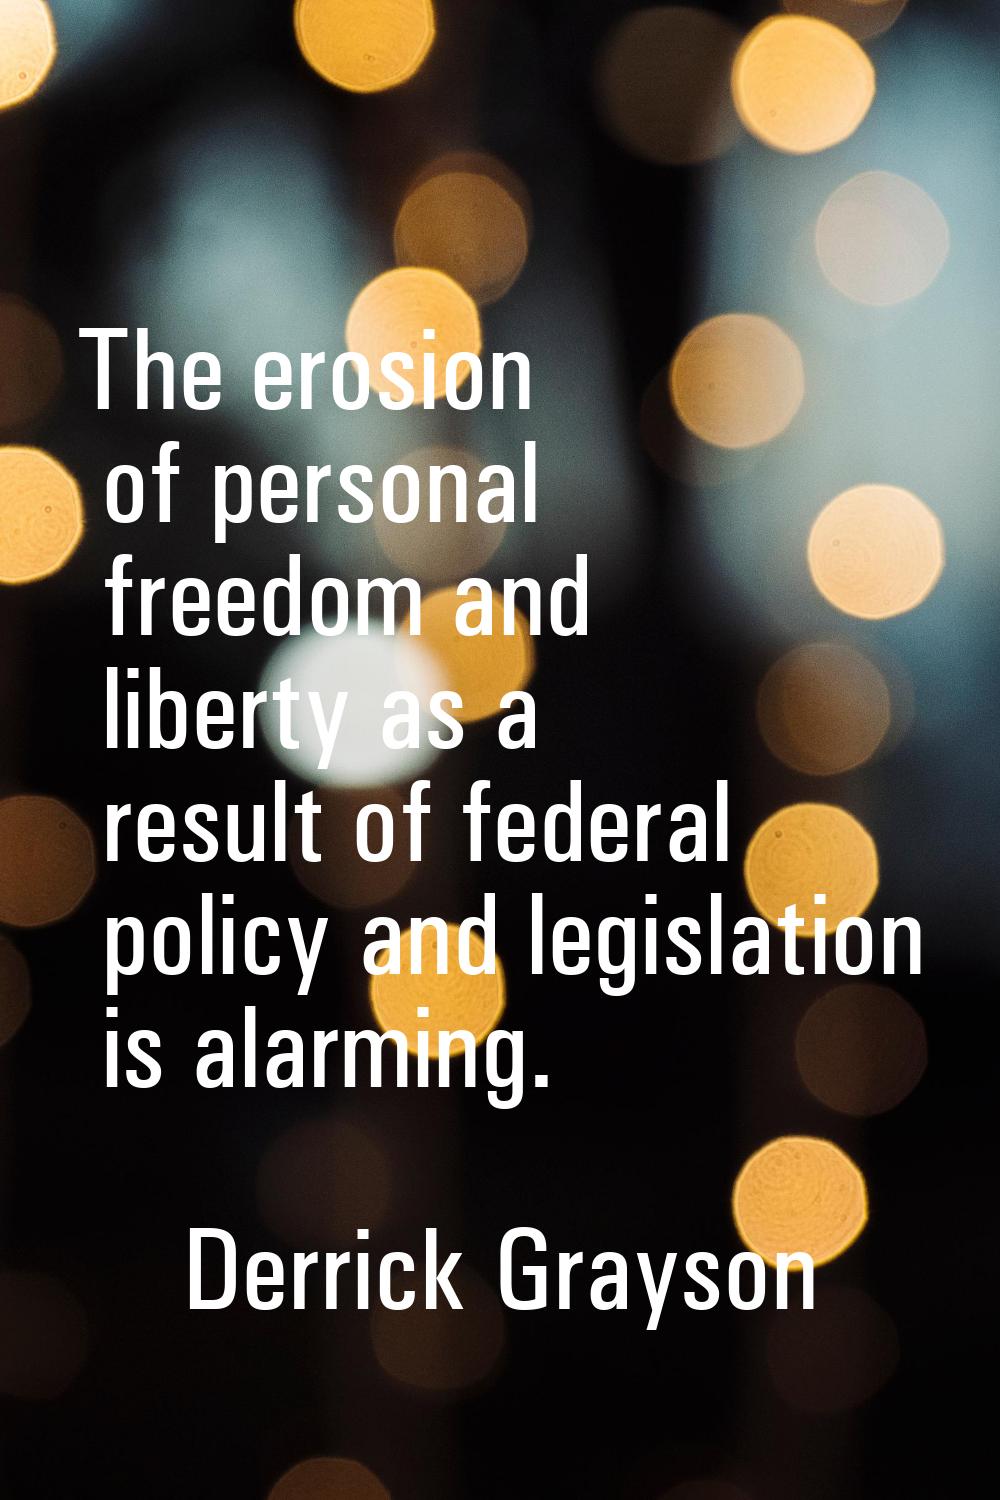 The erosion of personal freedom and liberty as a result of federal policy and legislation is alarmi